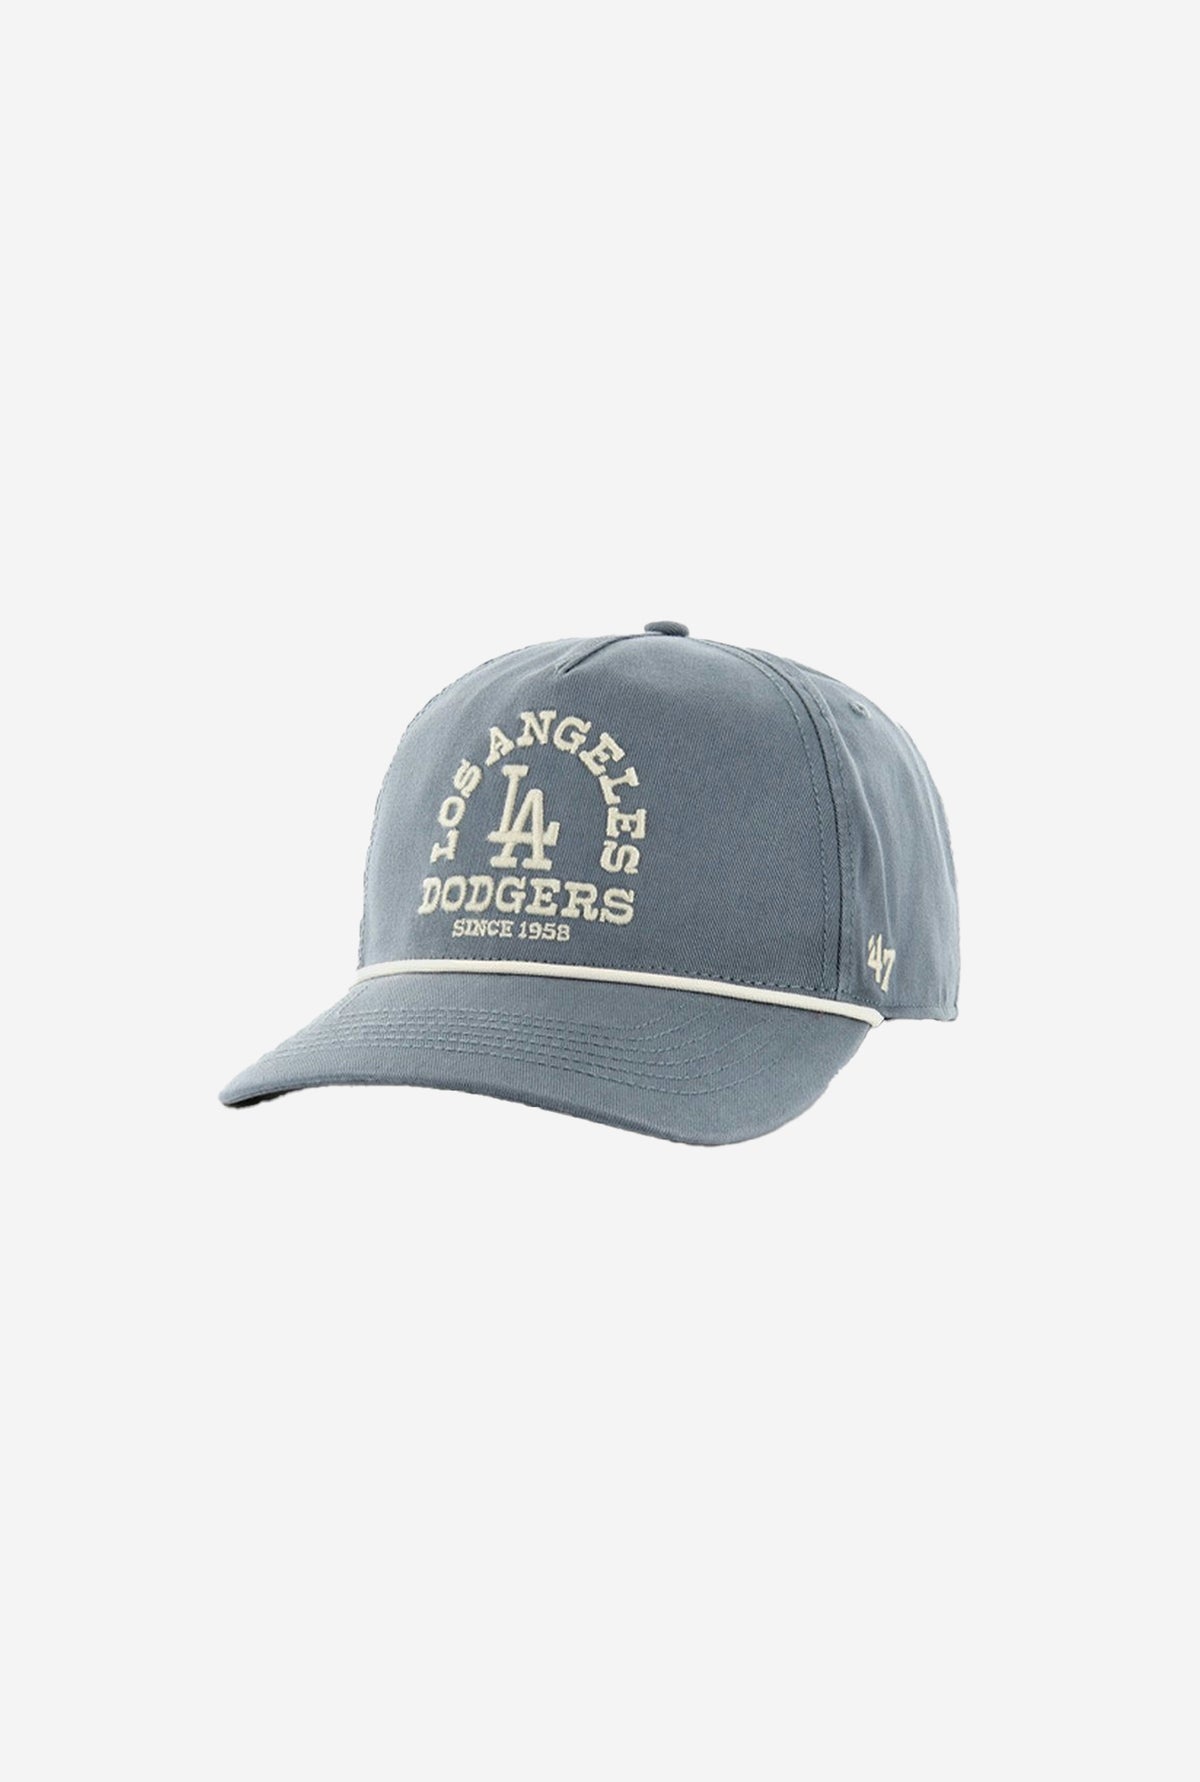 Los Angeles Dodgers Canyon Ranchero Hitch Hat